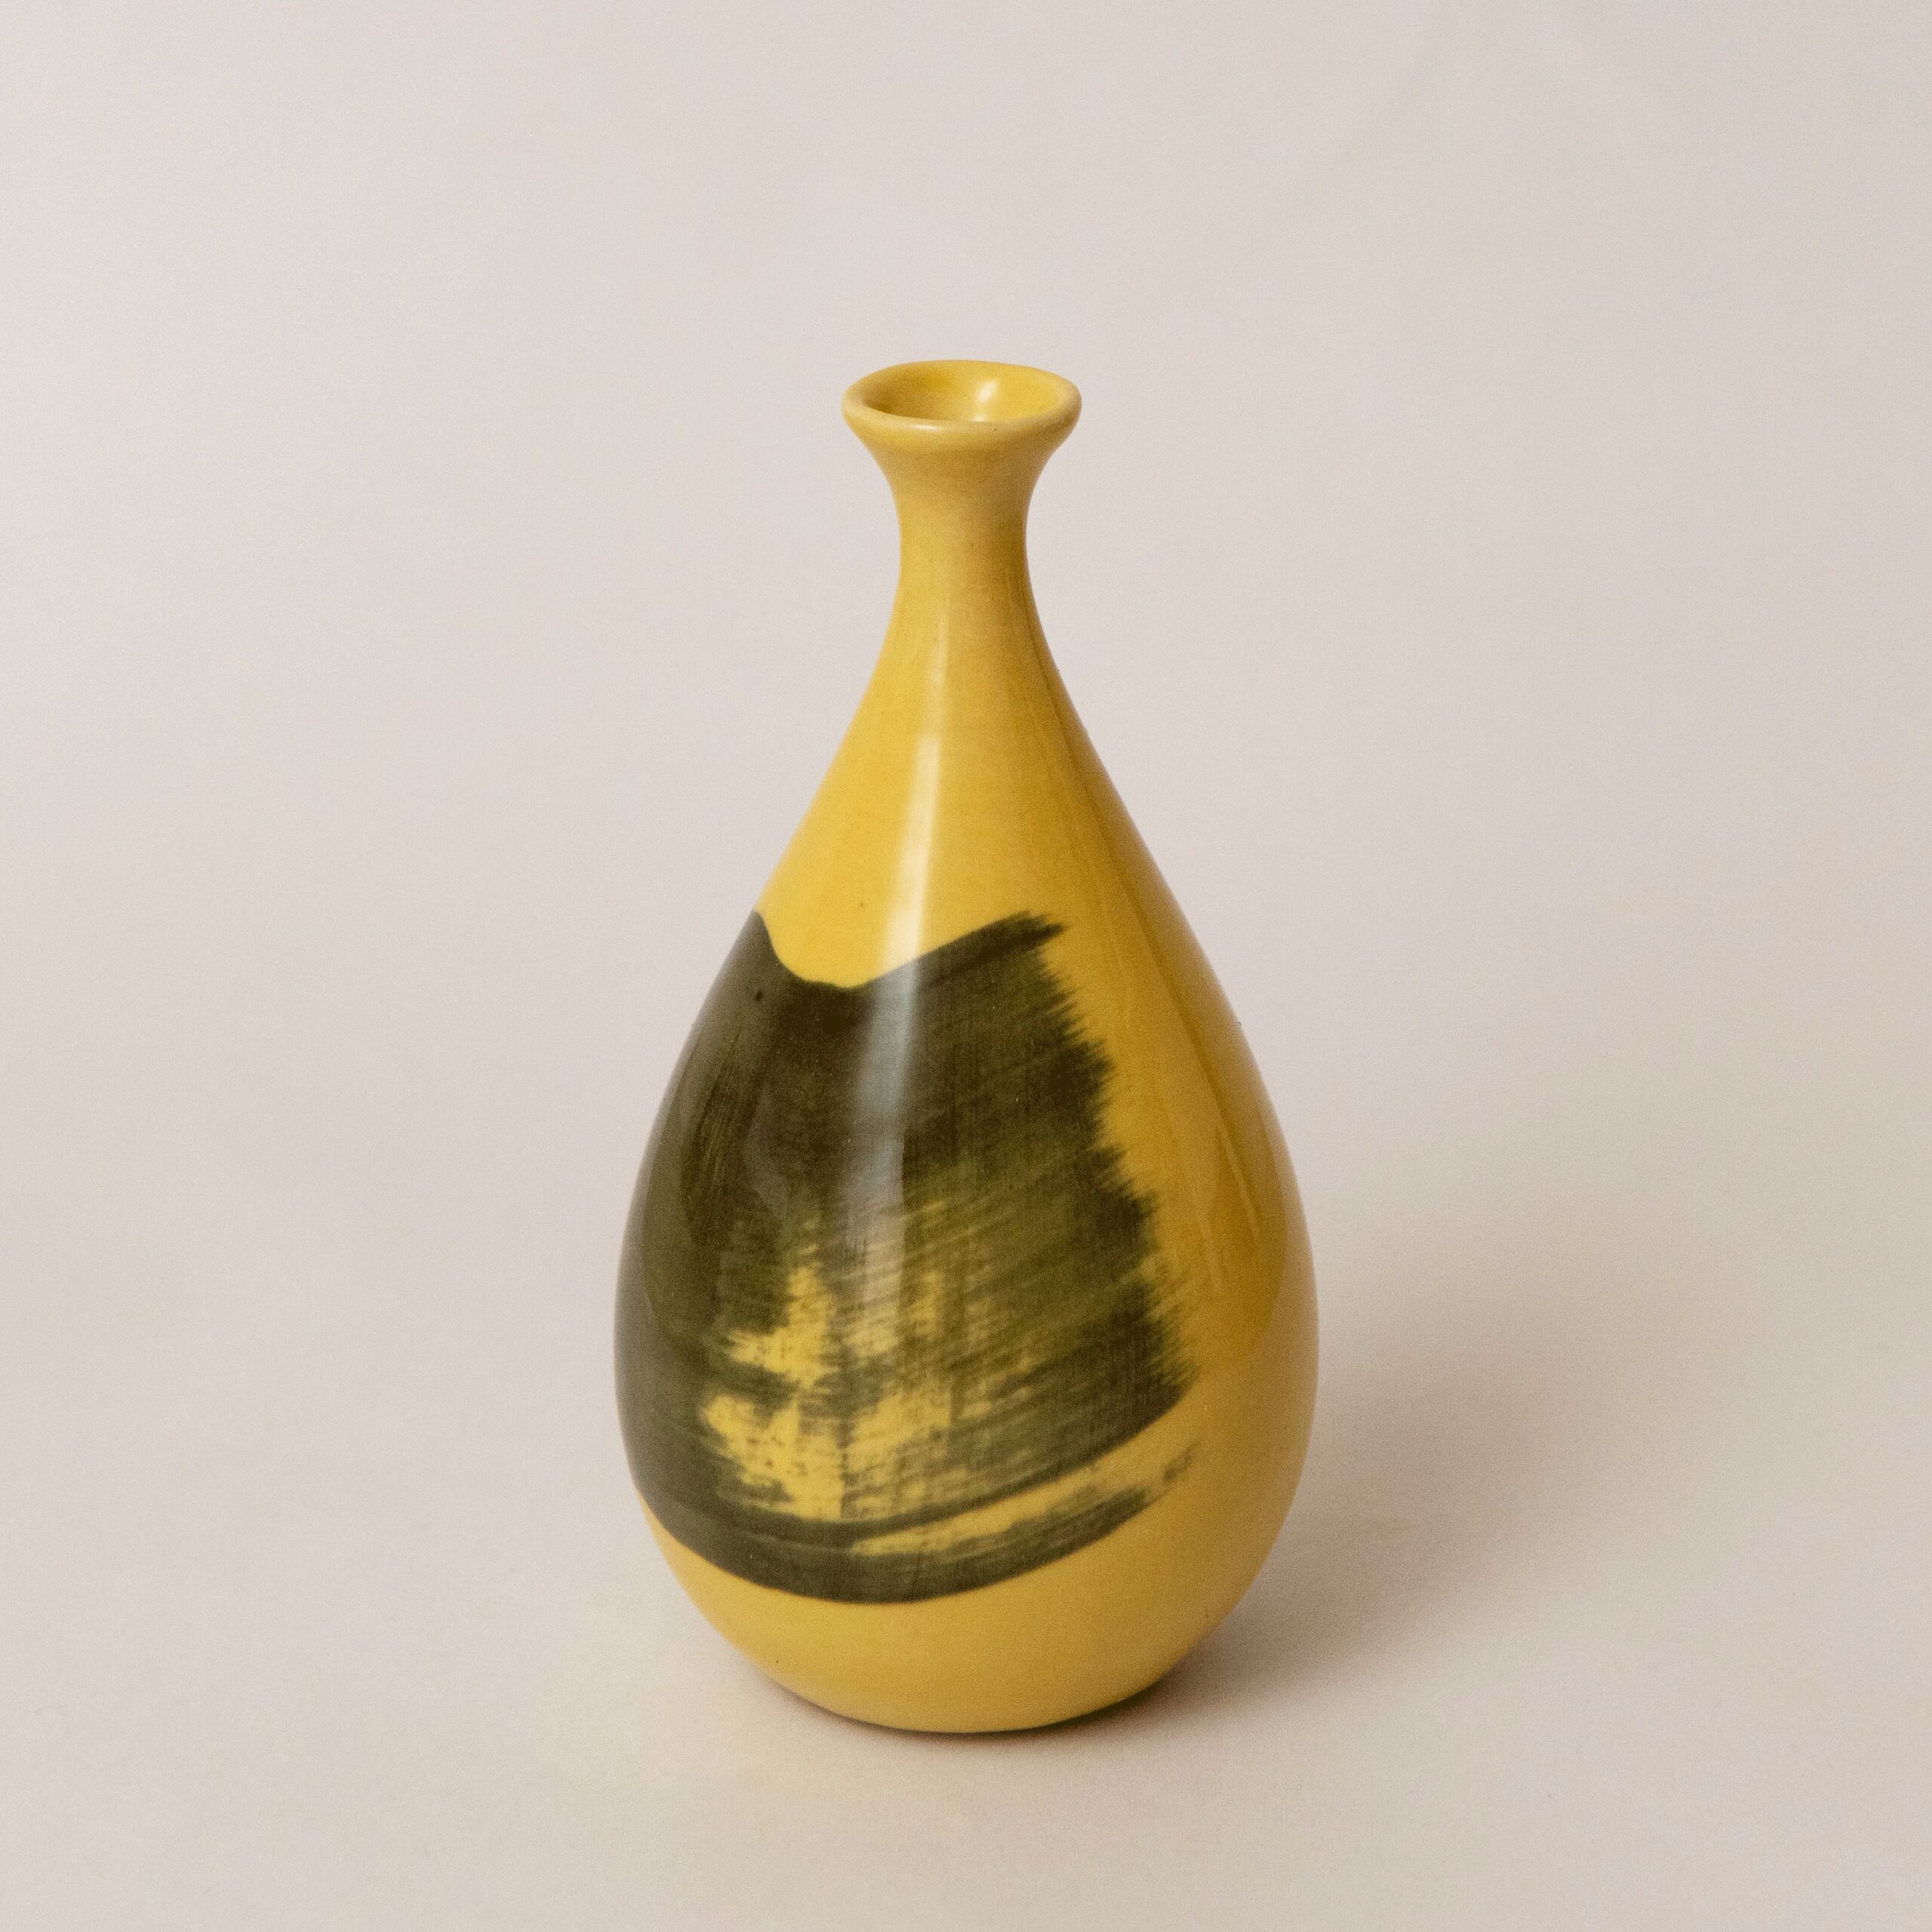 Studio Saboo: Small Brushed Vase in Yellow Product Image 1 of 1